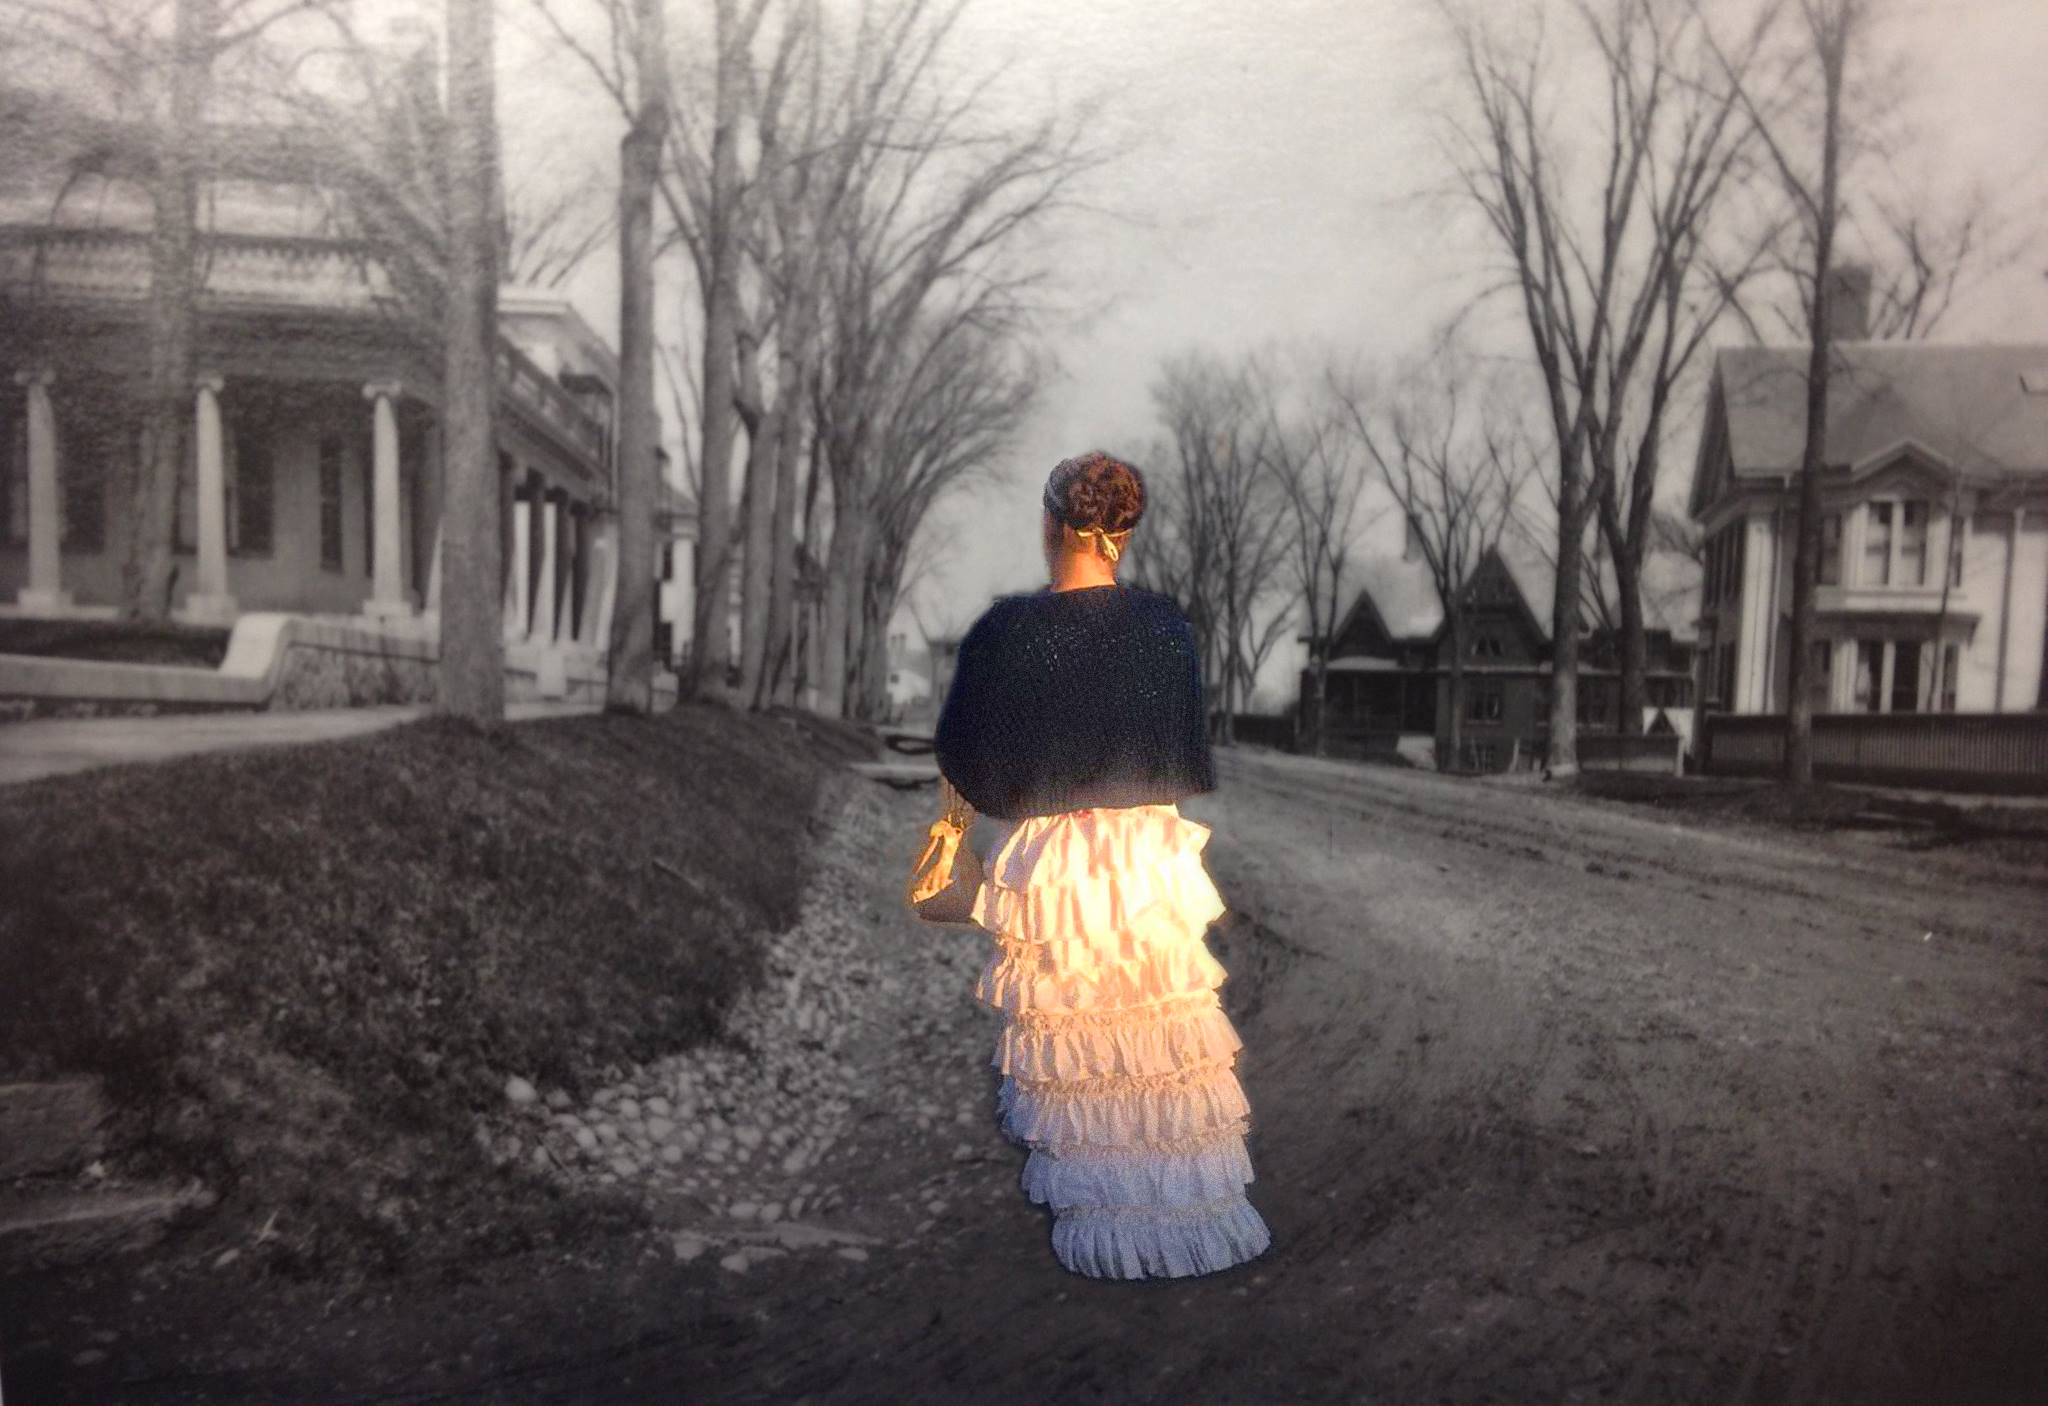 a woman in a bustle dress is pictured walking down a historic street